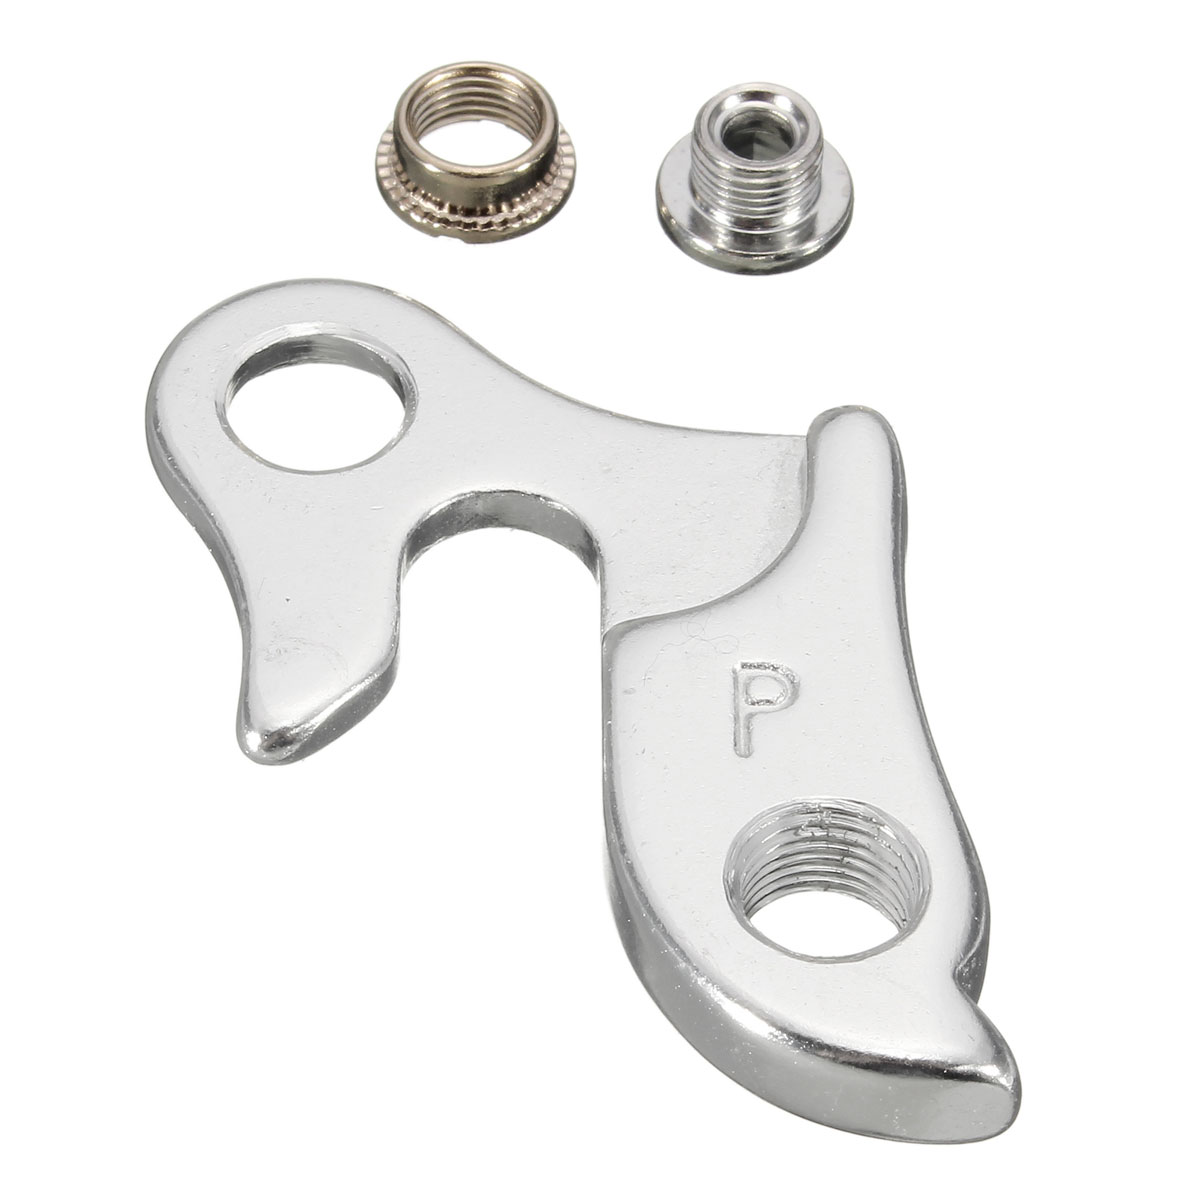 MTB-Bicycle-Frame-Rear-Derailleur-Mech-Hanger-Dropout-With-Nuts-Silver-Type-1014742